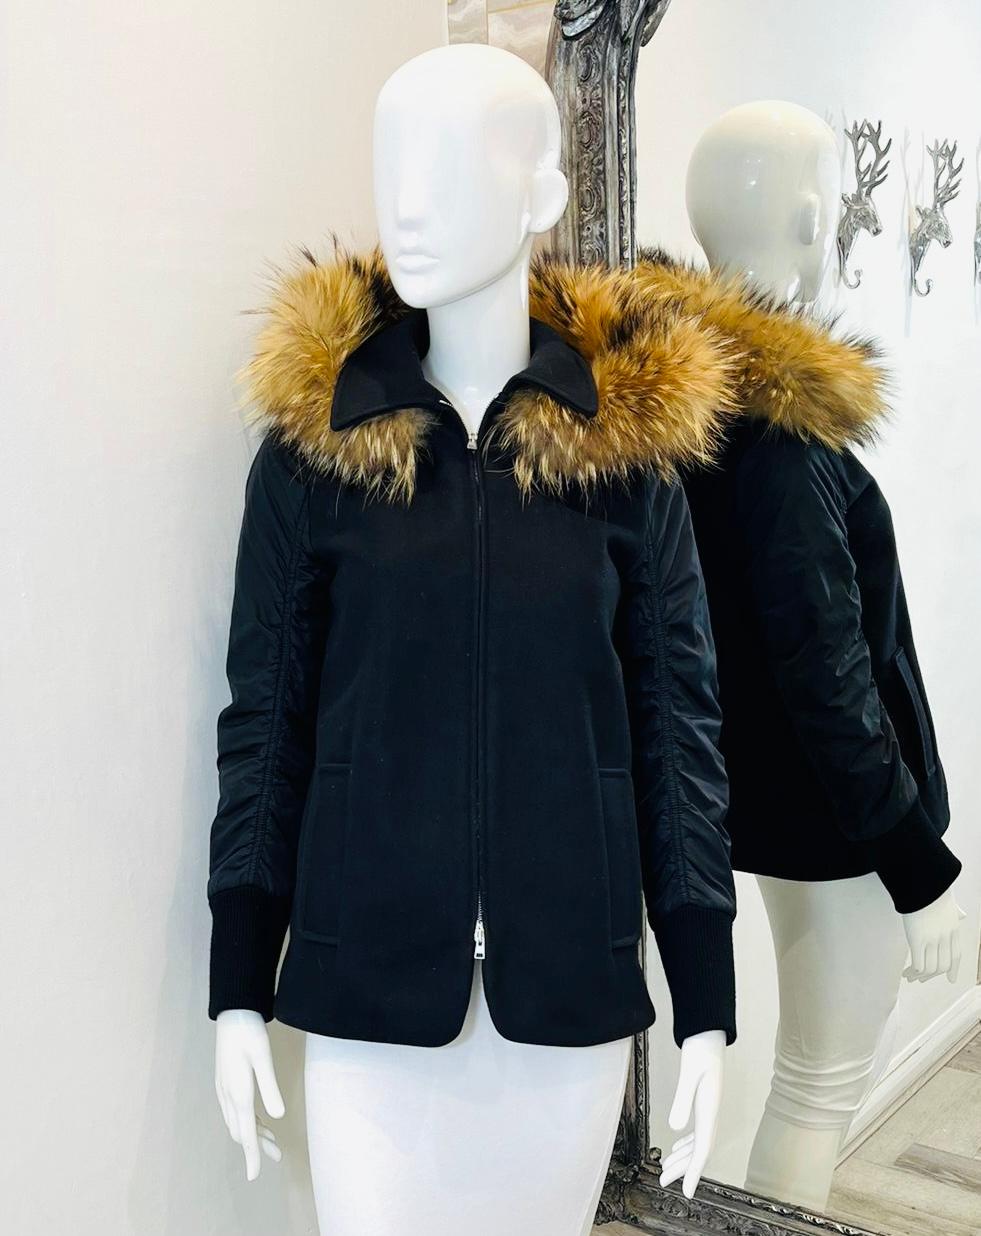 Marni Raccoon Trimmed Wool & Shearling Coat/Jacket

Black coat designed with raccoon trimmed centre zipped hood.

Detailed with ruched detailed, long sleeves and collared neckline.

Featuring ribbed cuffs, side pockets and zip fastening.

Size –